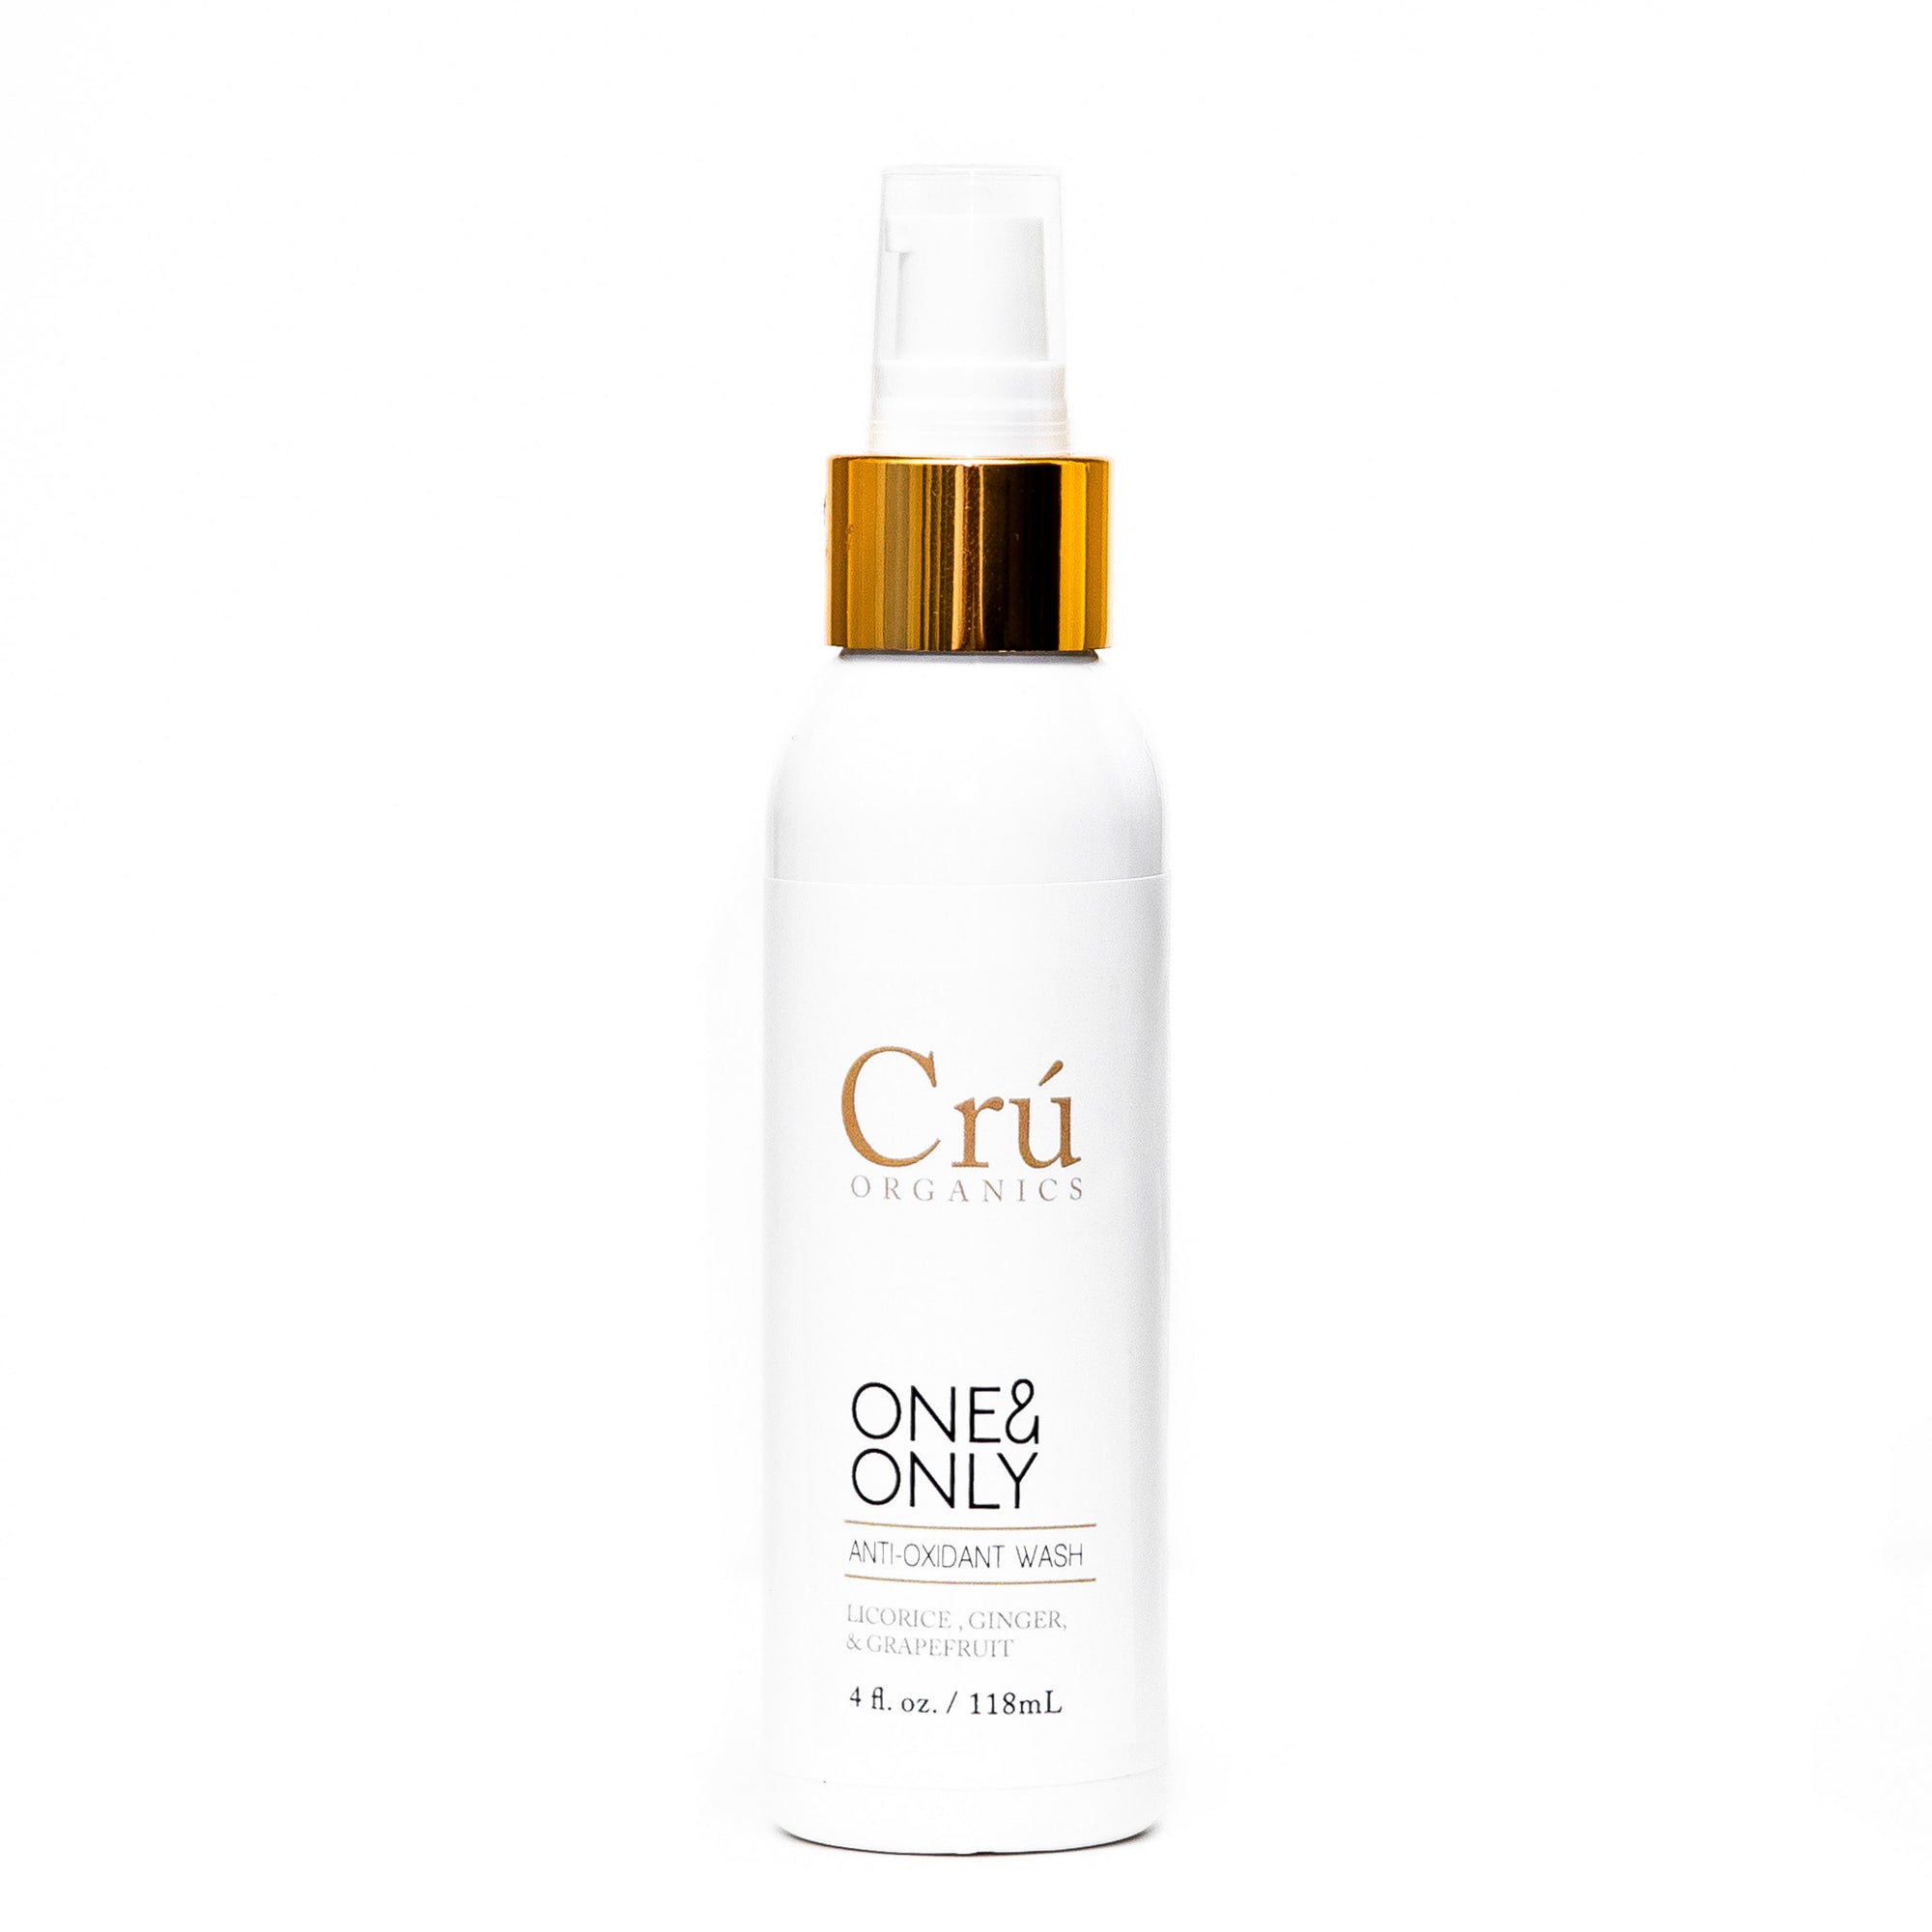 One & Only Cleanser